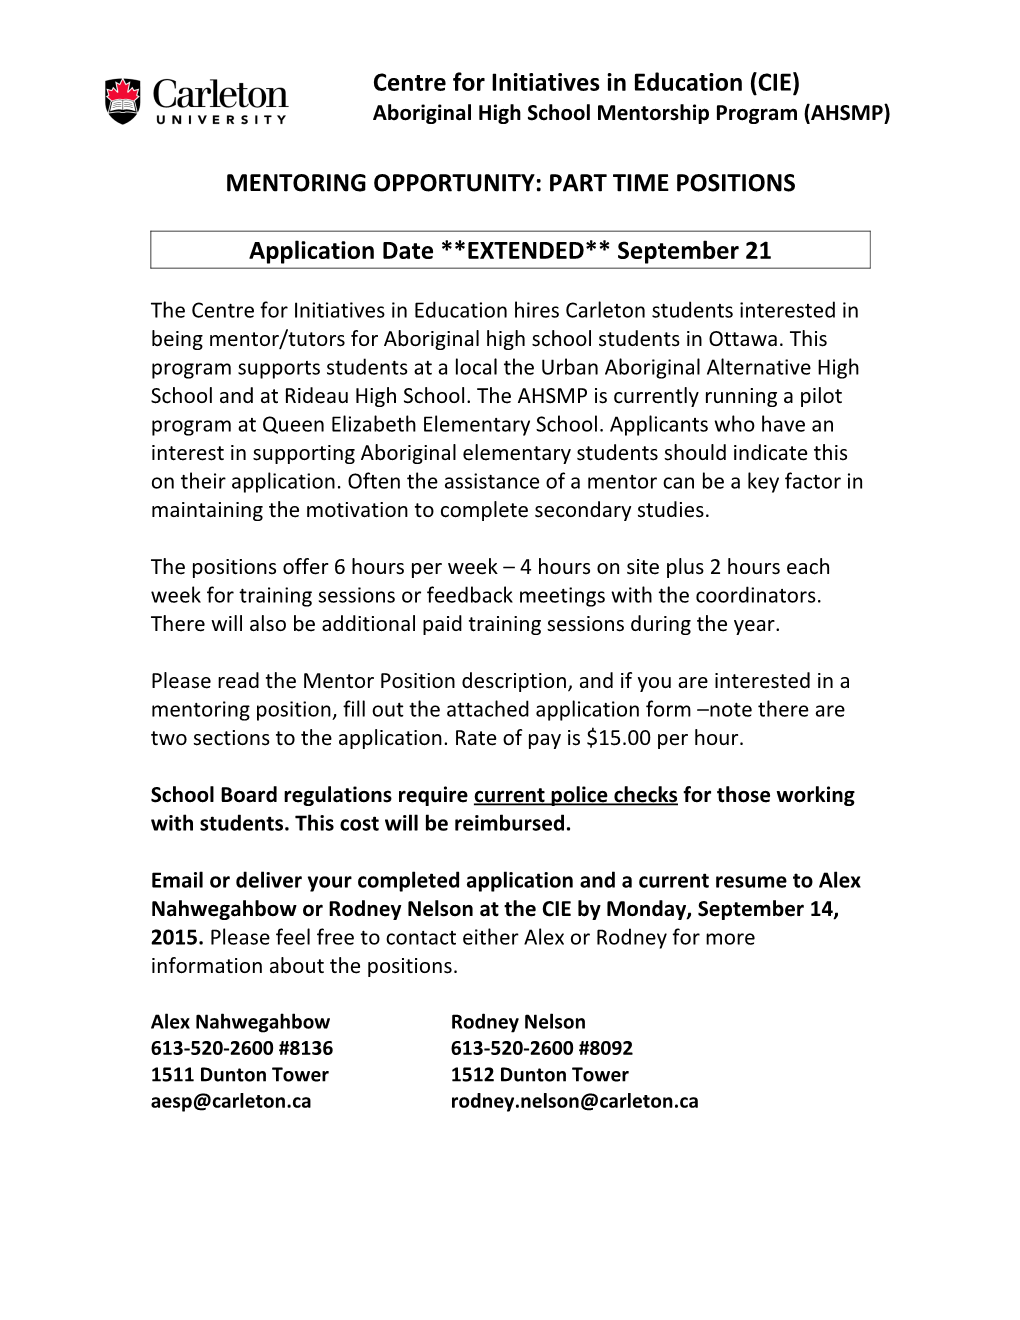 Mentoring Jobs Available: We Are Looking for Student Mentors to Work with Aboriginal High